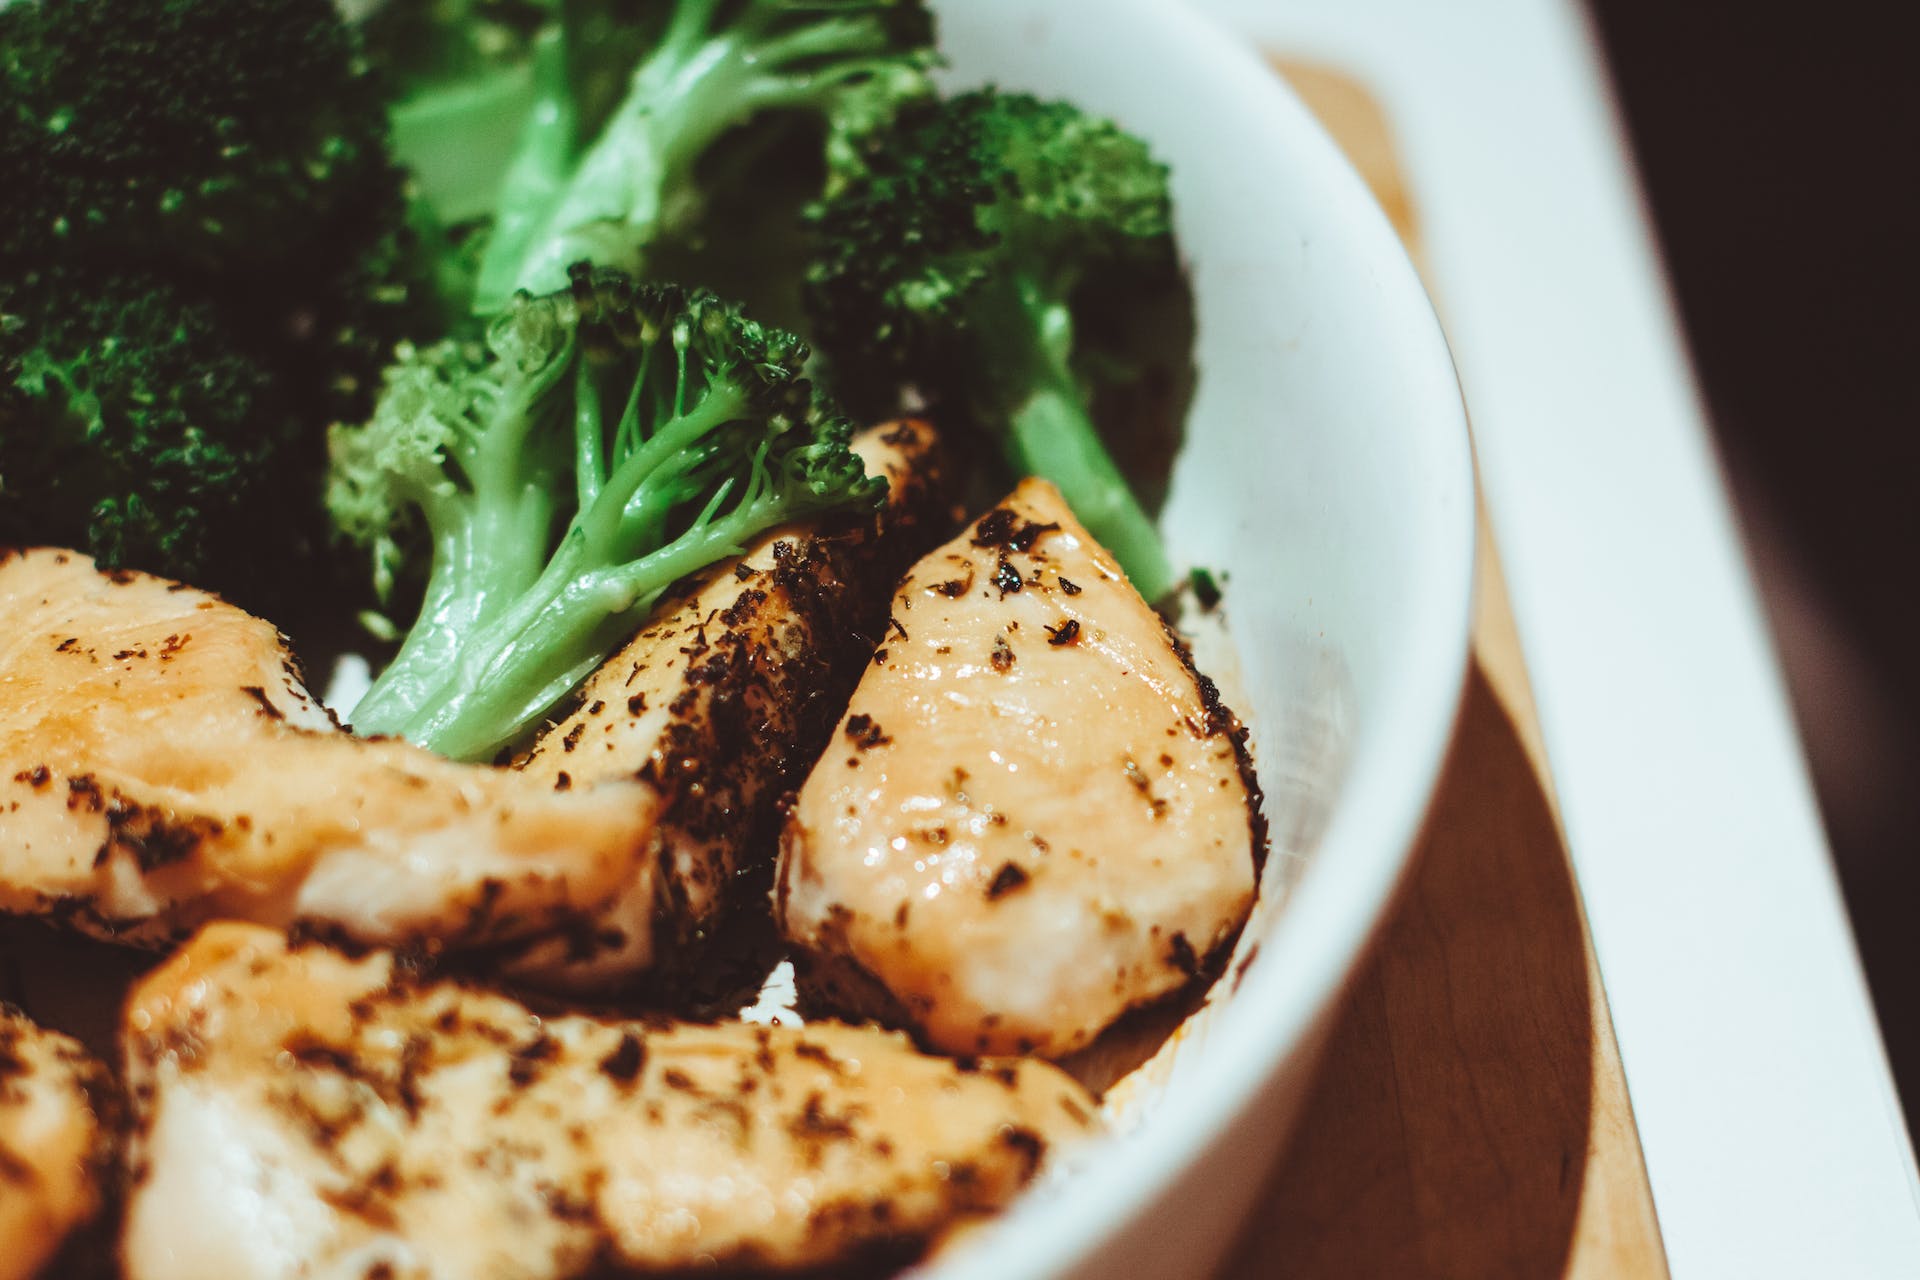 Chicken and broccoli on plate | Source: Pexels